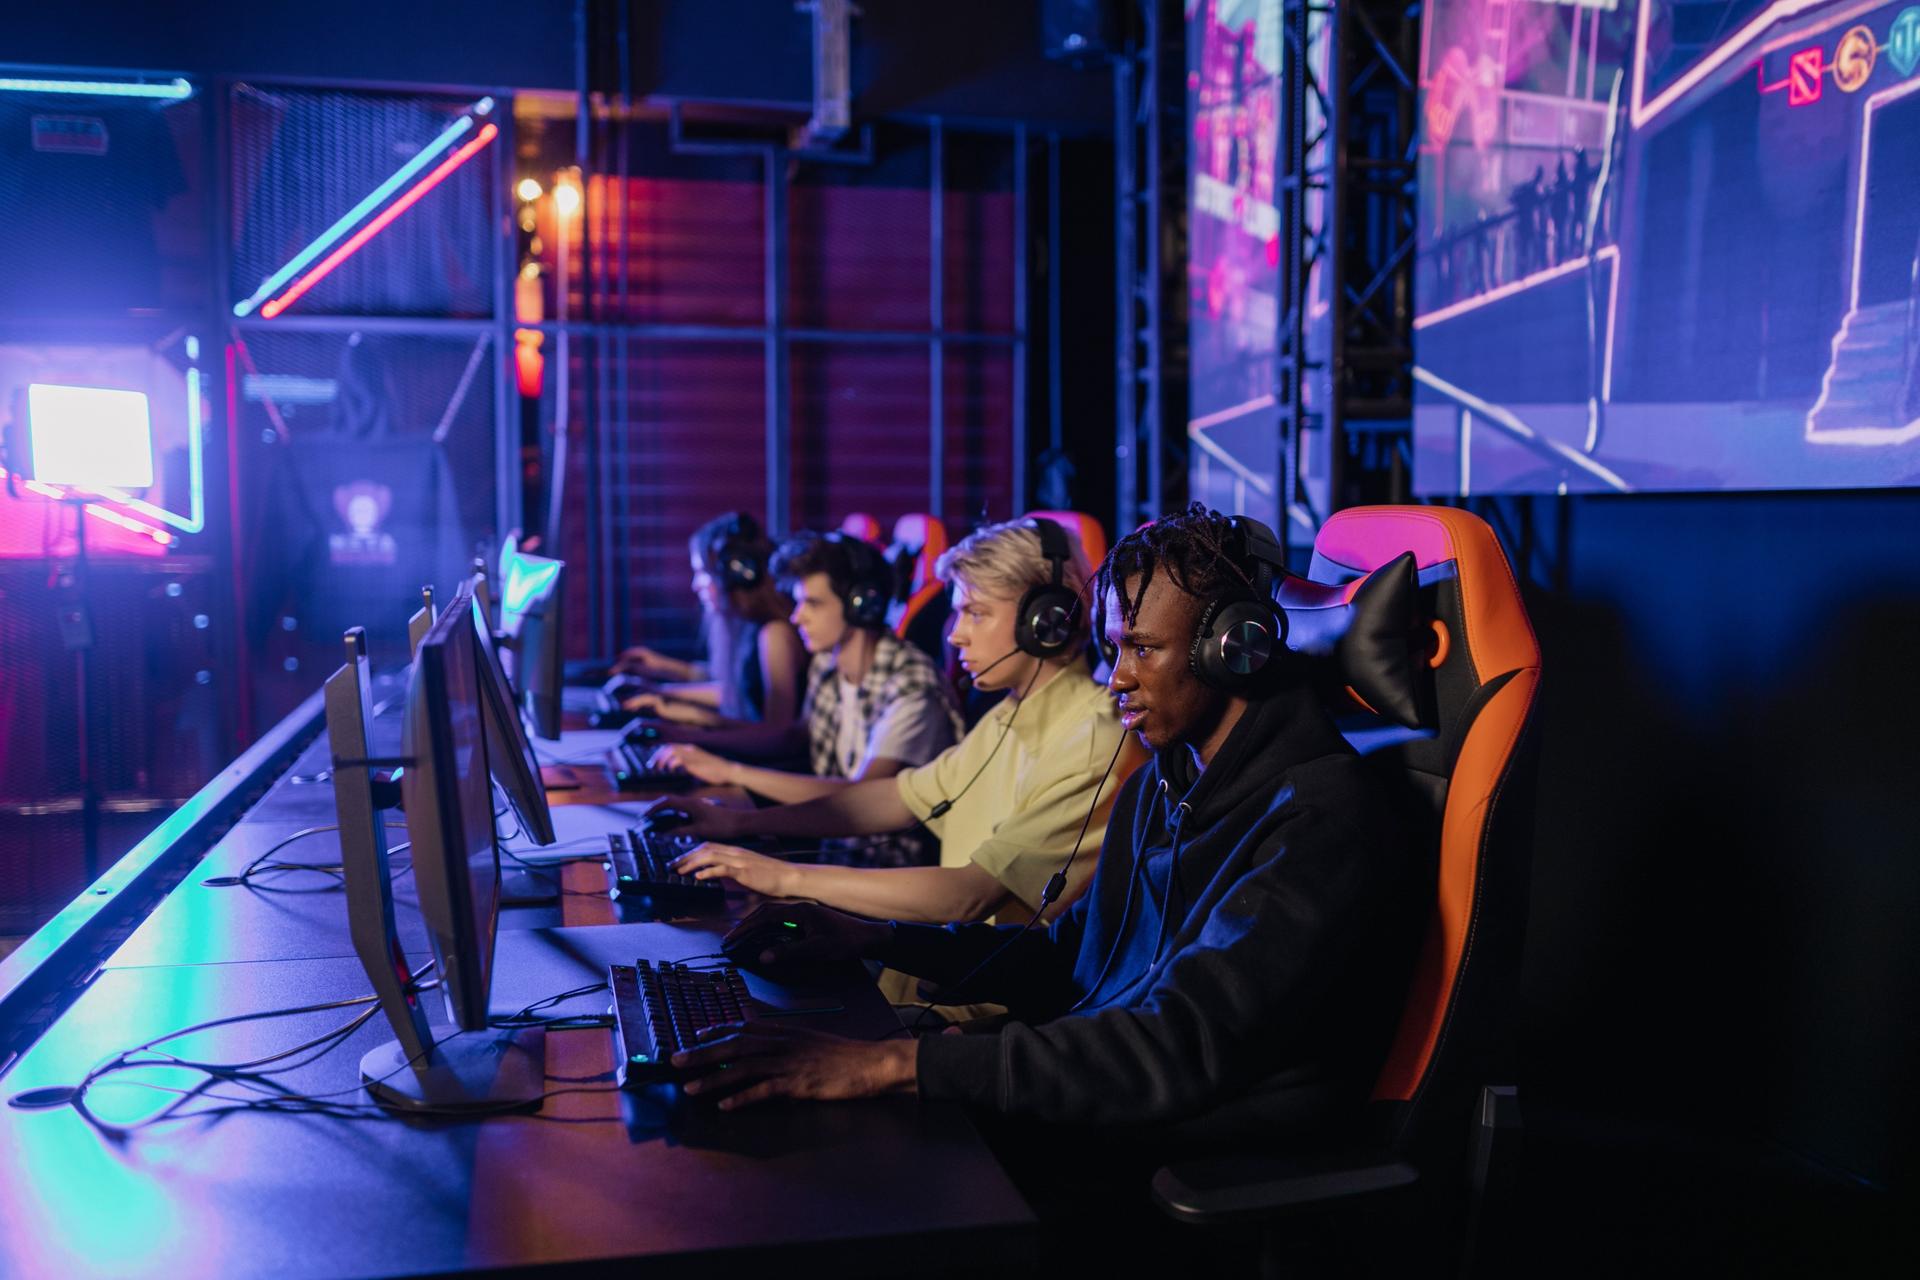 The rise of e-sports in Finland and worldwide